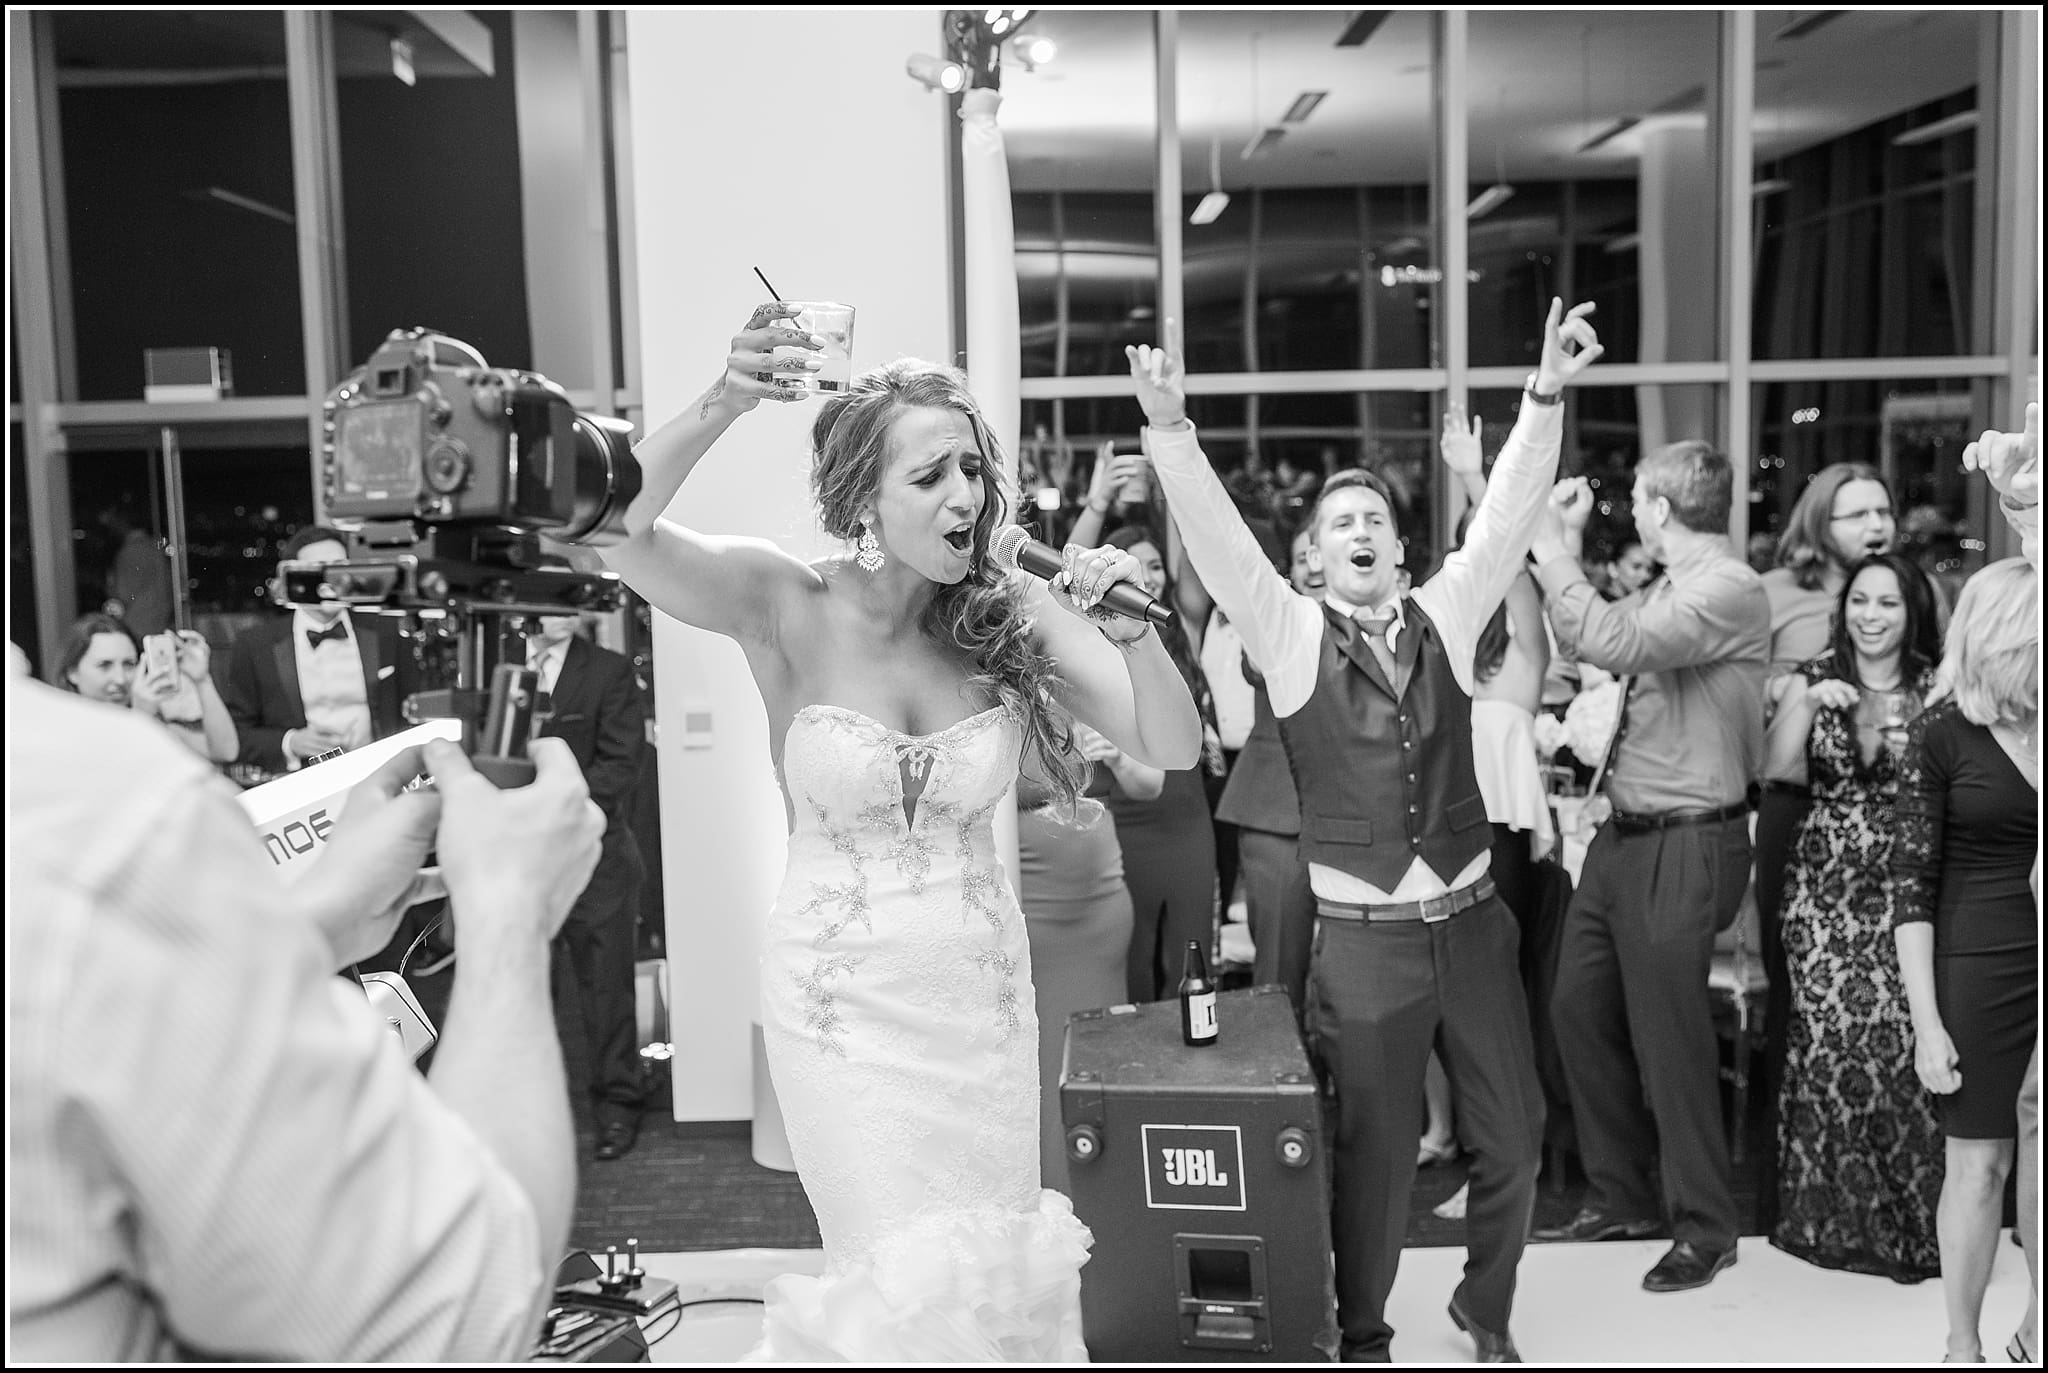  favorite wedding images 2016, wedding photos from 2016, our favorite wedding photos, bride rapping, live performance at wedding, epic rap battle with a bride